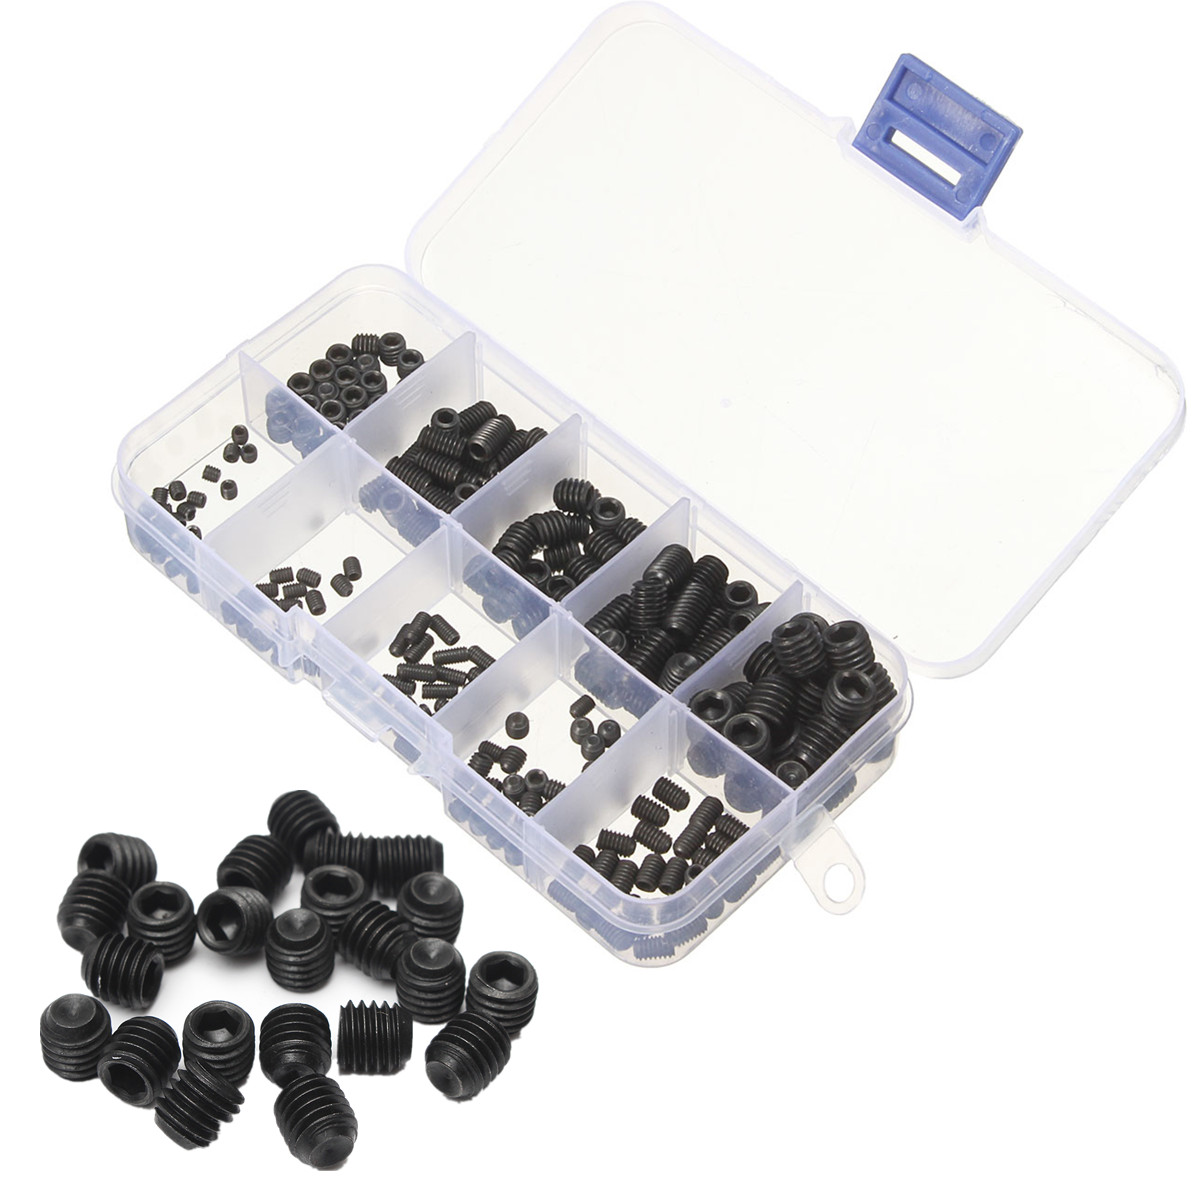 Sulevetrade-MXAS1-250Pcs-Head-Socket-Hex-Set-Grub-Screw-Cup-Point-Alloy-Steel-Assortment-With-Case-1129439-5